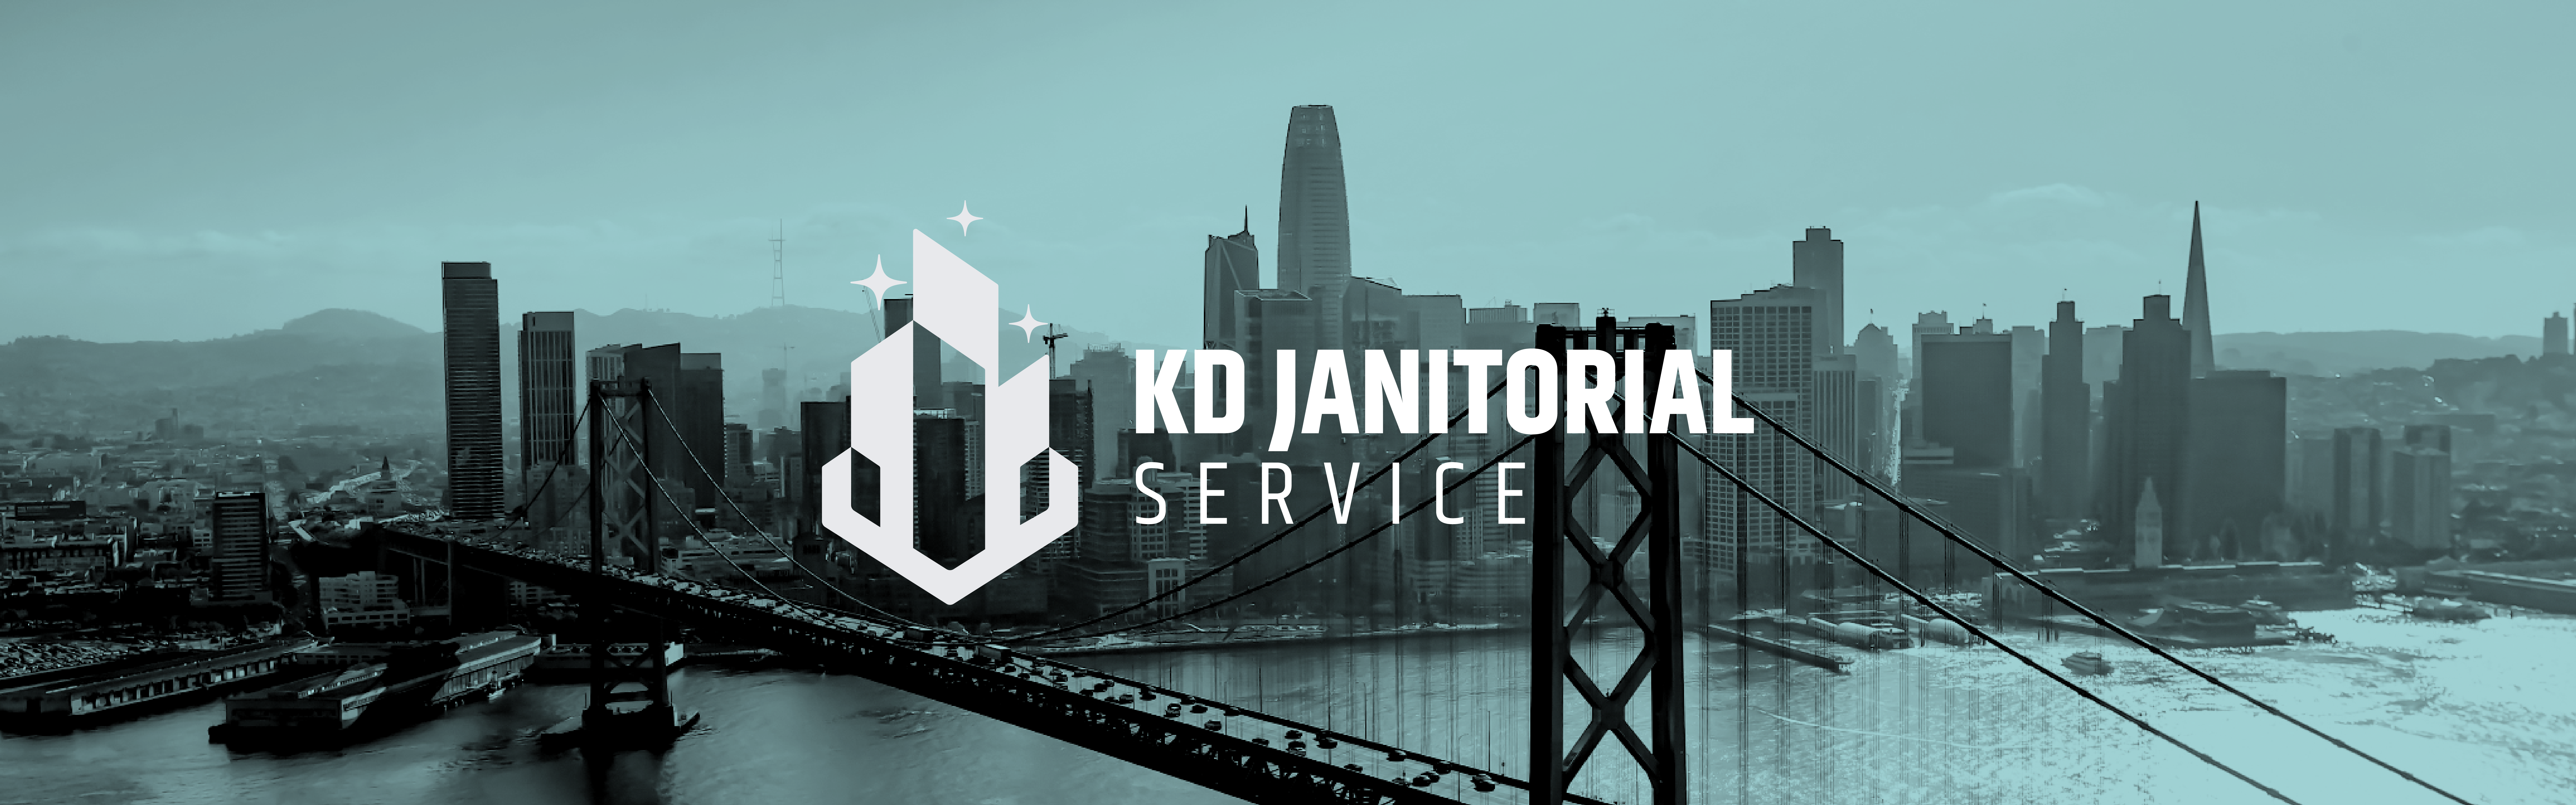 Logo of KD Janitorial Service superimposed on a monochromatic cityscape with a bridge.